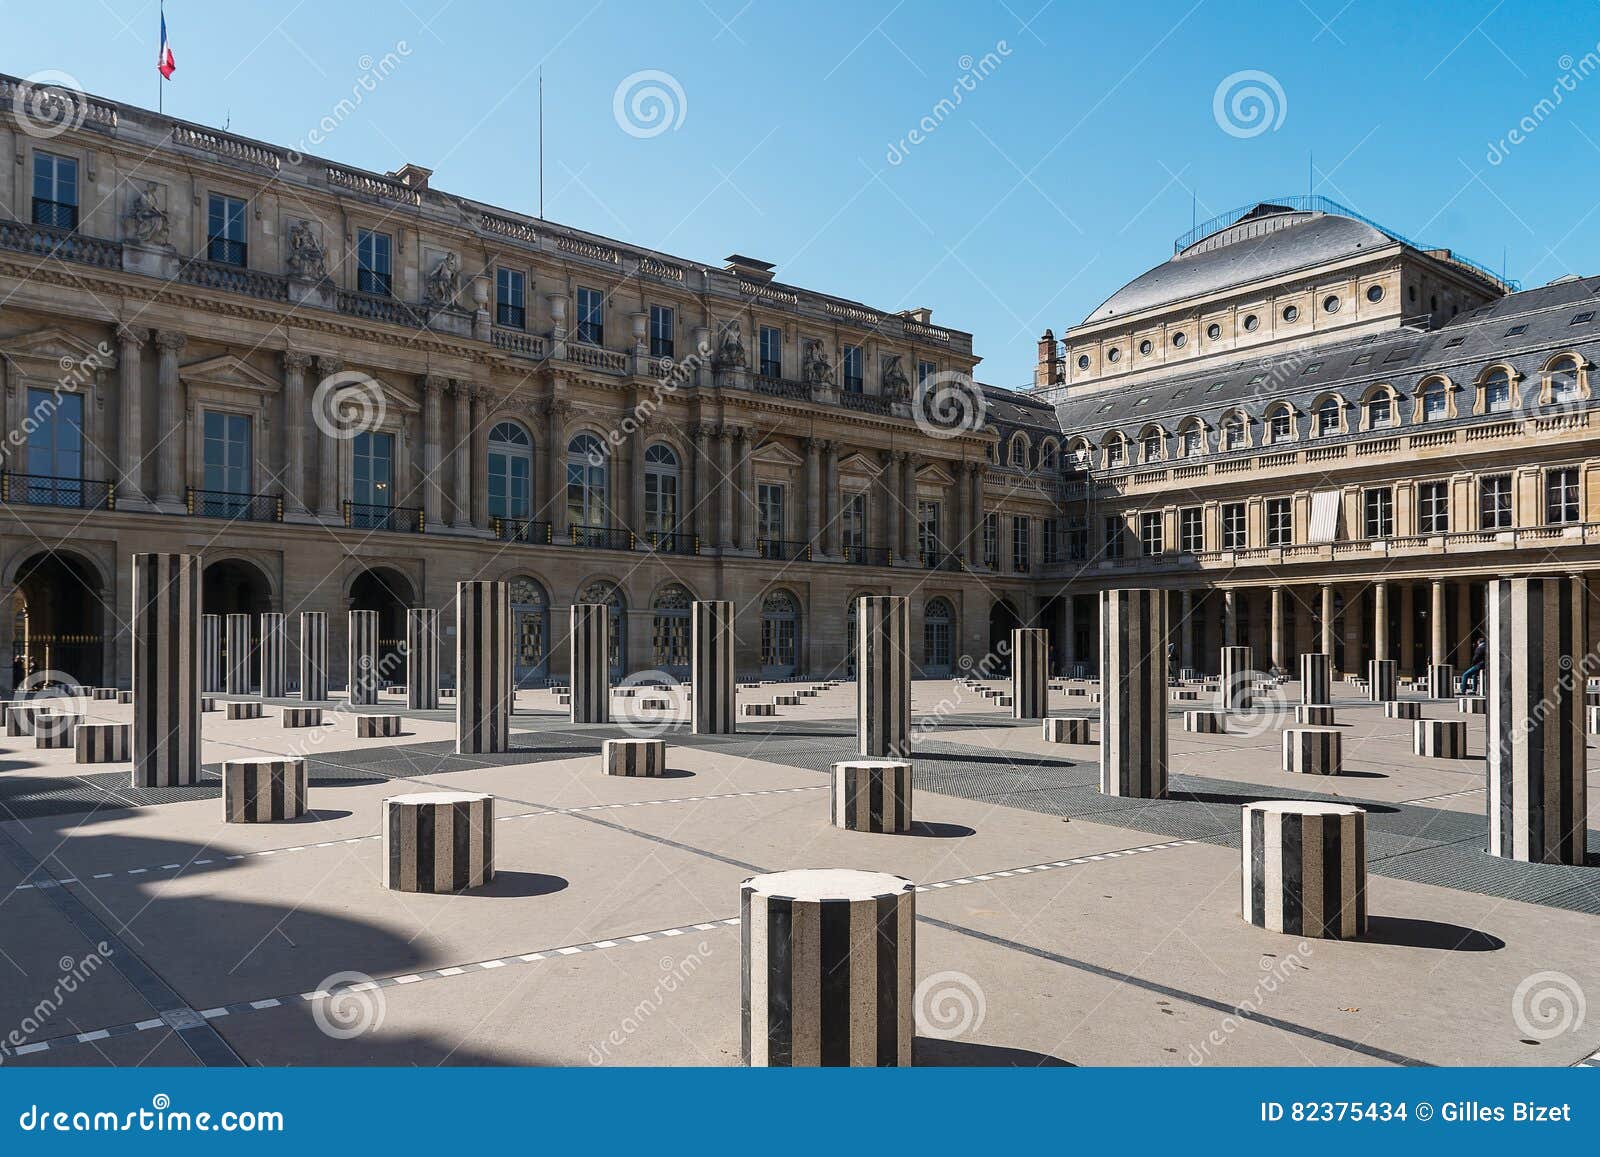 courtyard of the royal palace, columns of buren and roof of the